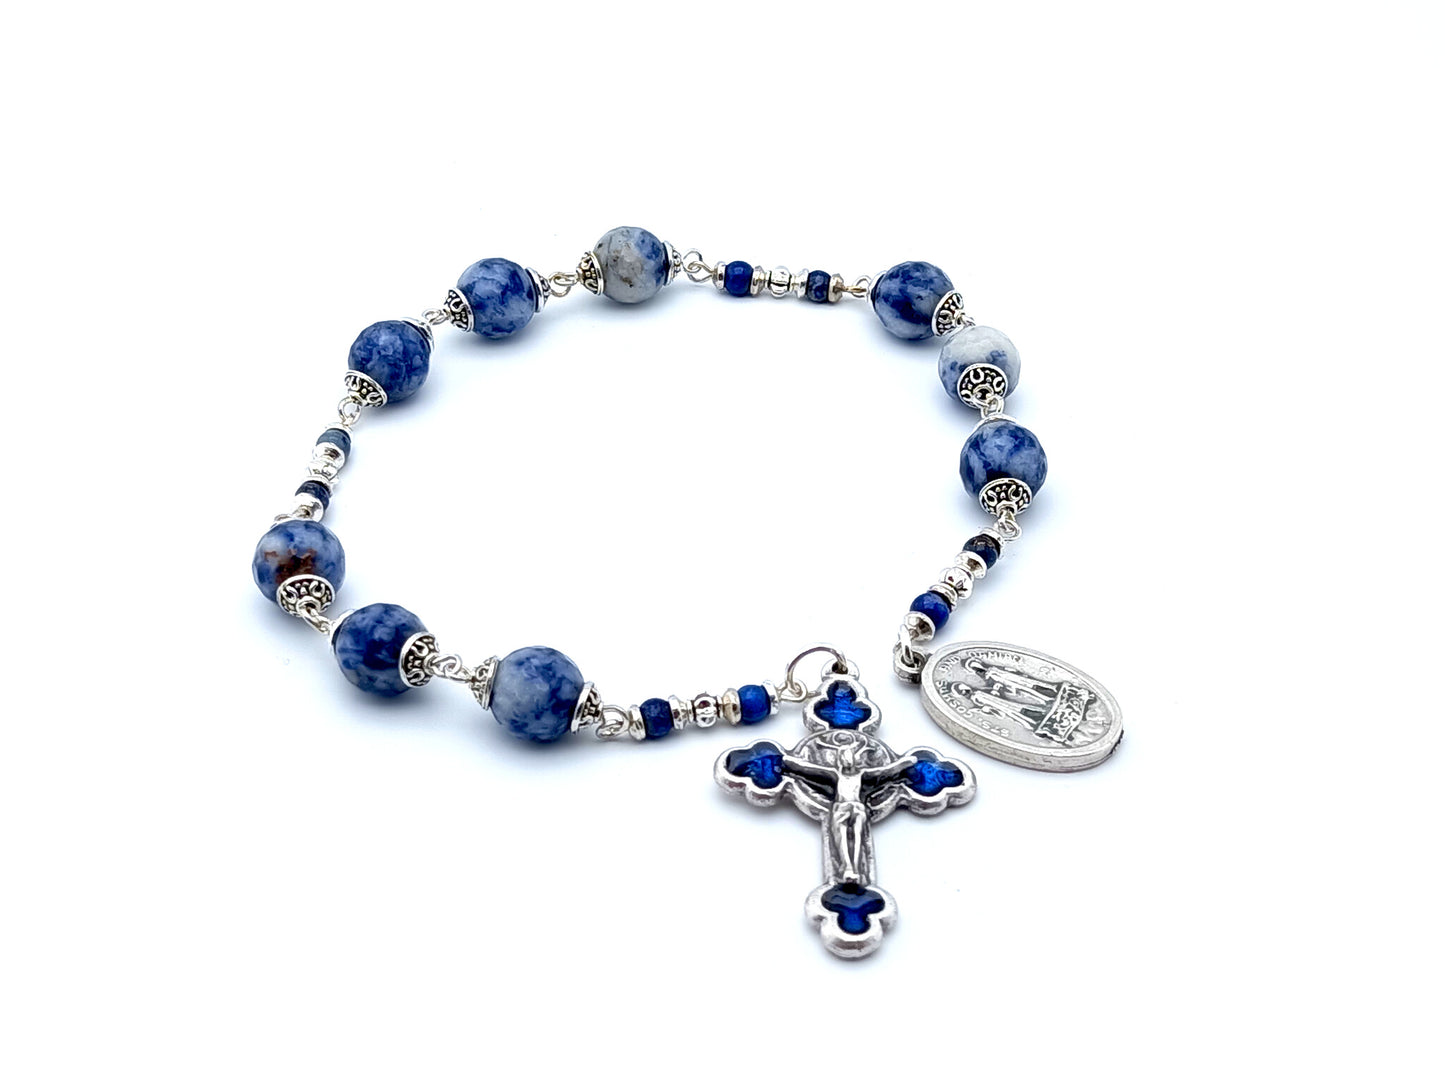 Saint Cosmas and Damian unique rosary beads prayer chaplet with blue agate gemstone beads, blue enamel Saint benedict crucifix and silver end medal.